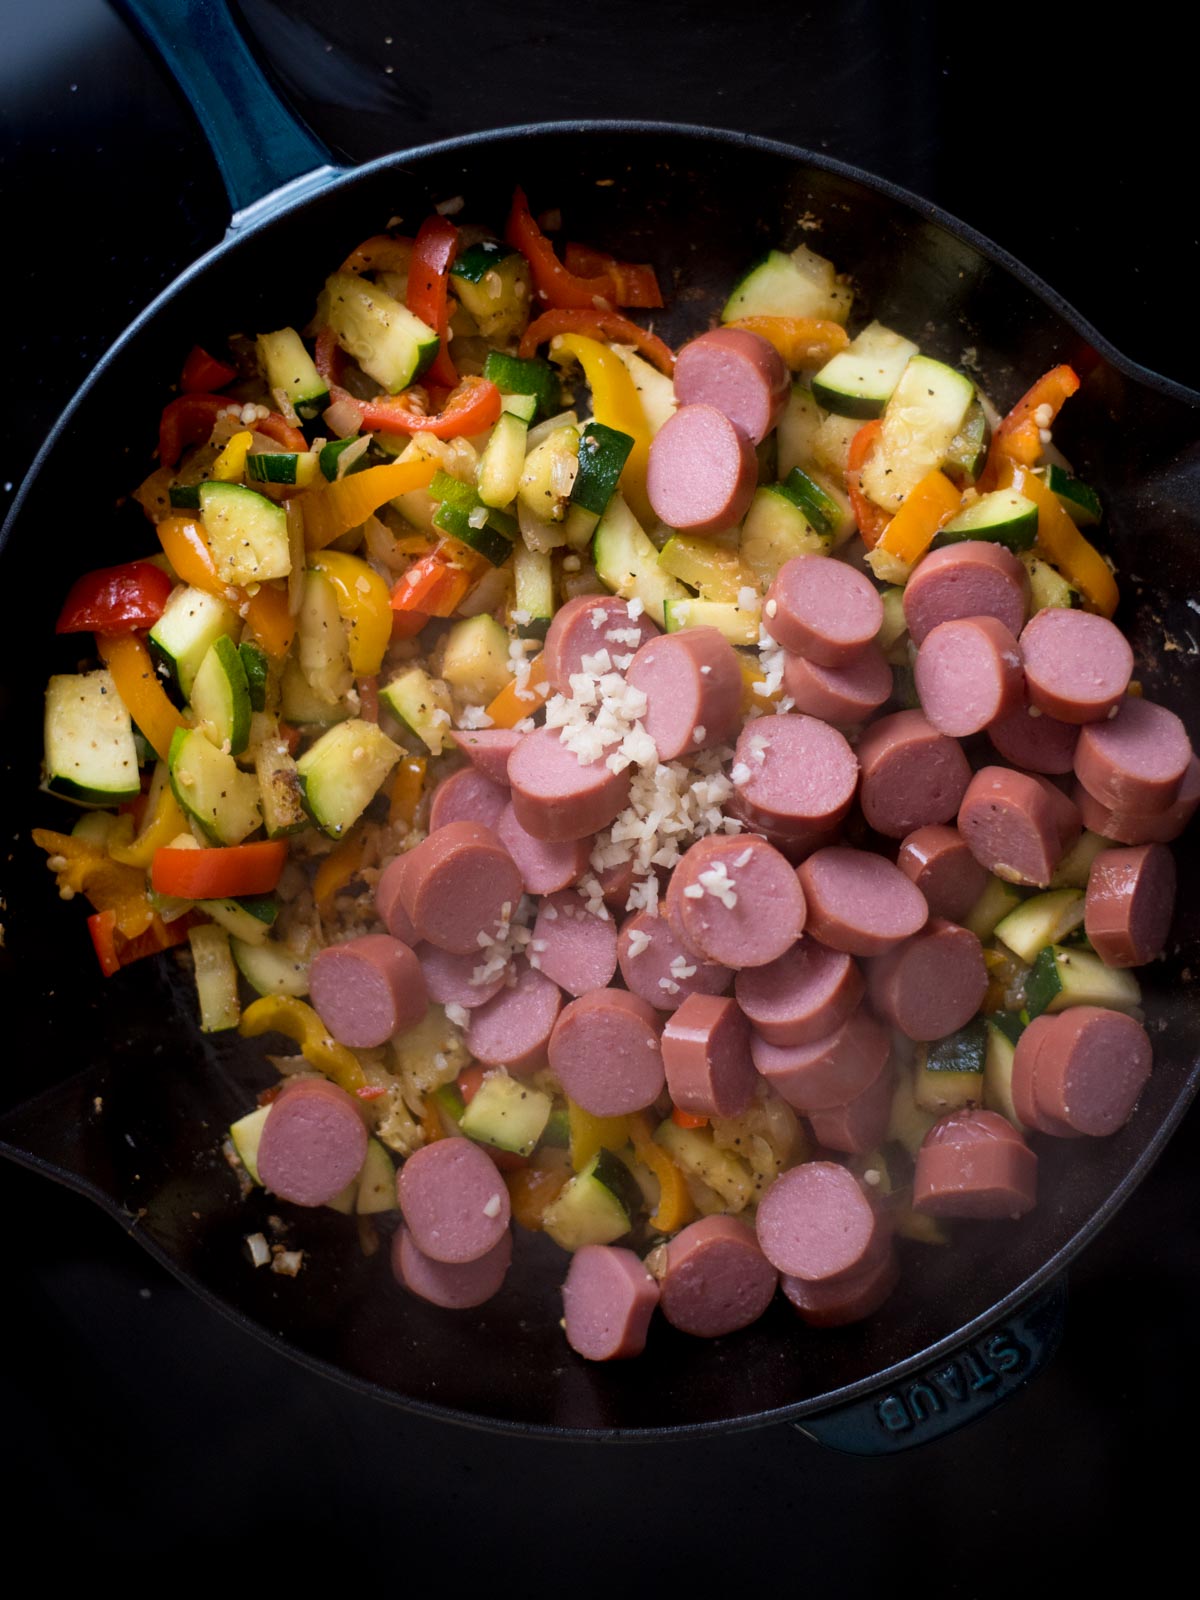 Veggies and sausage added to a skillet with diced garlic.